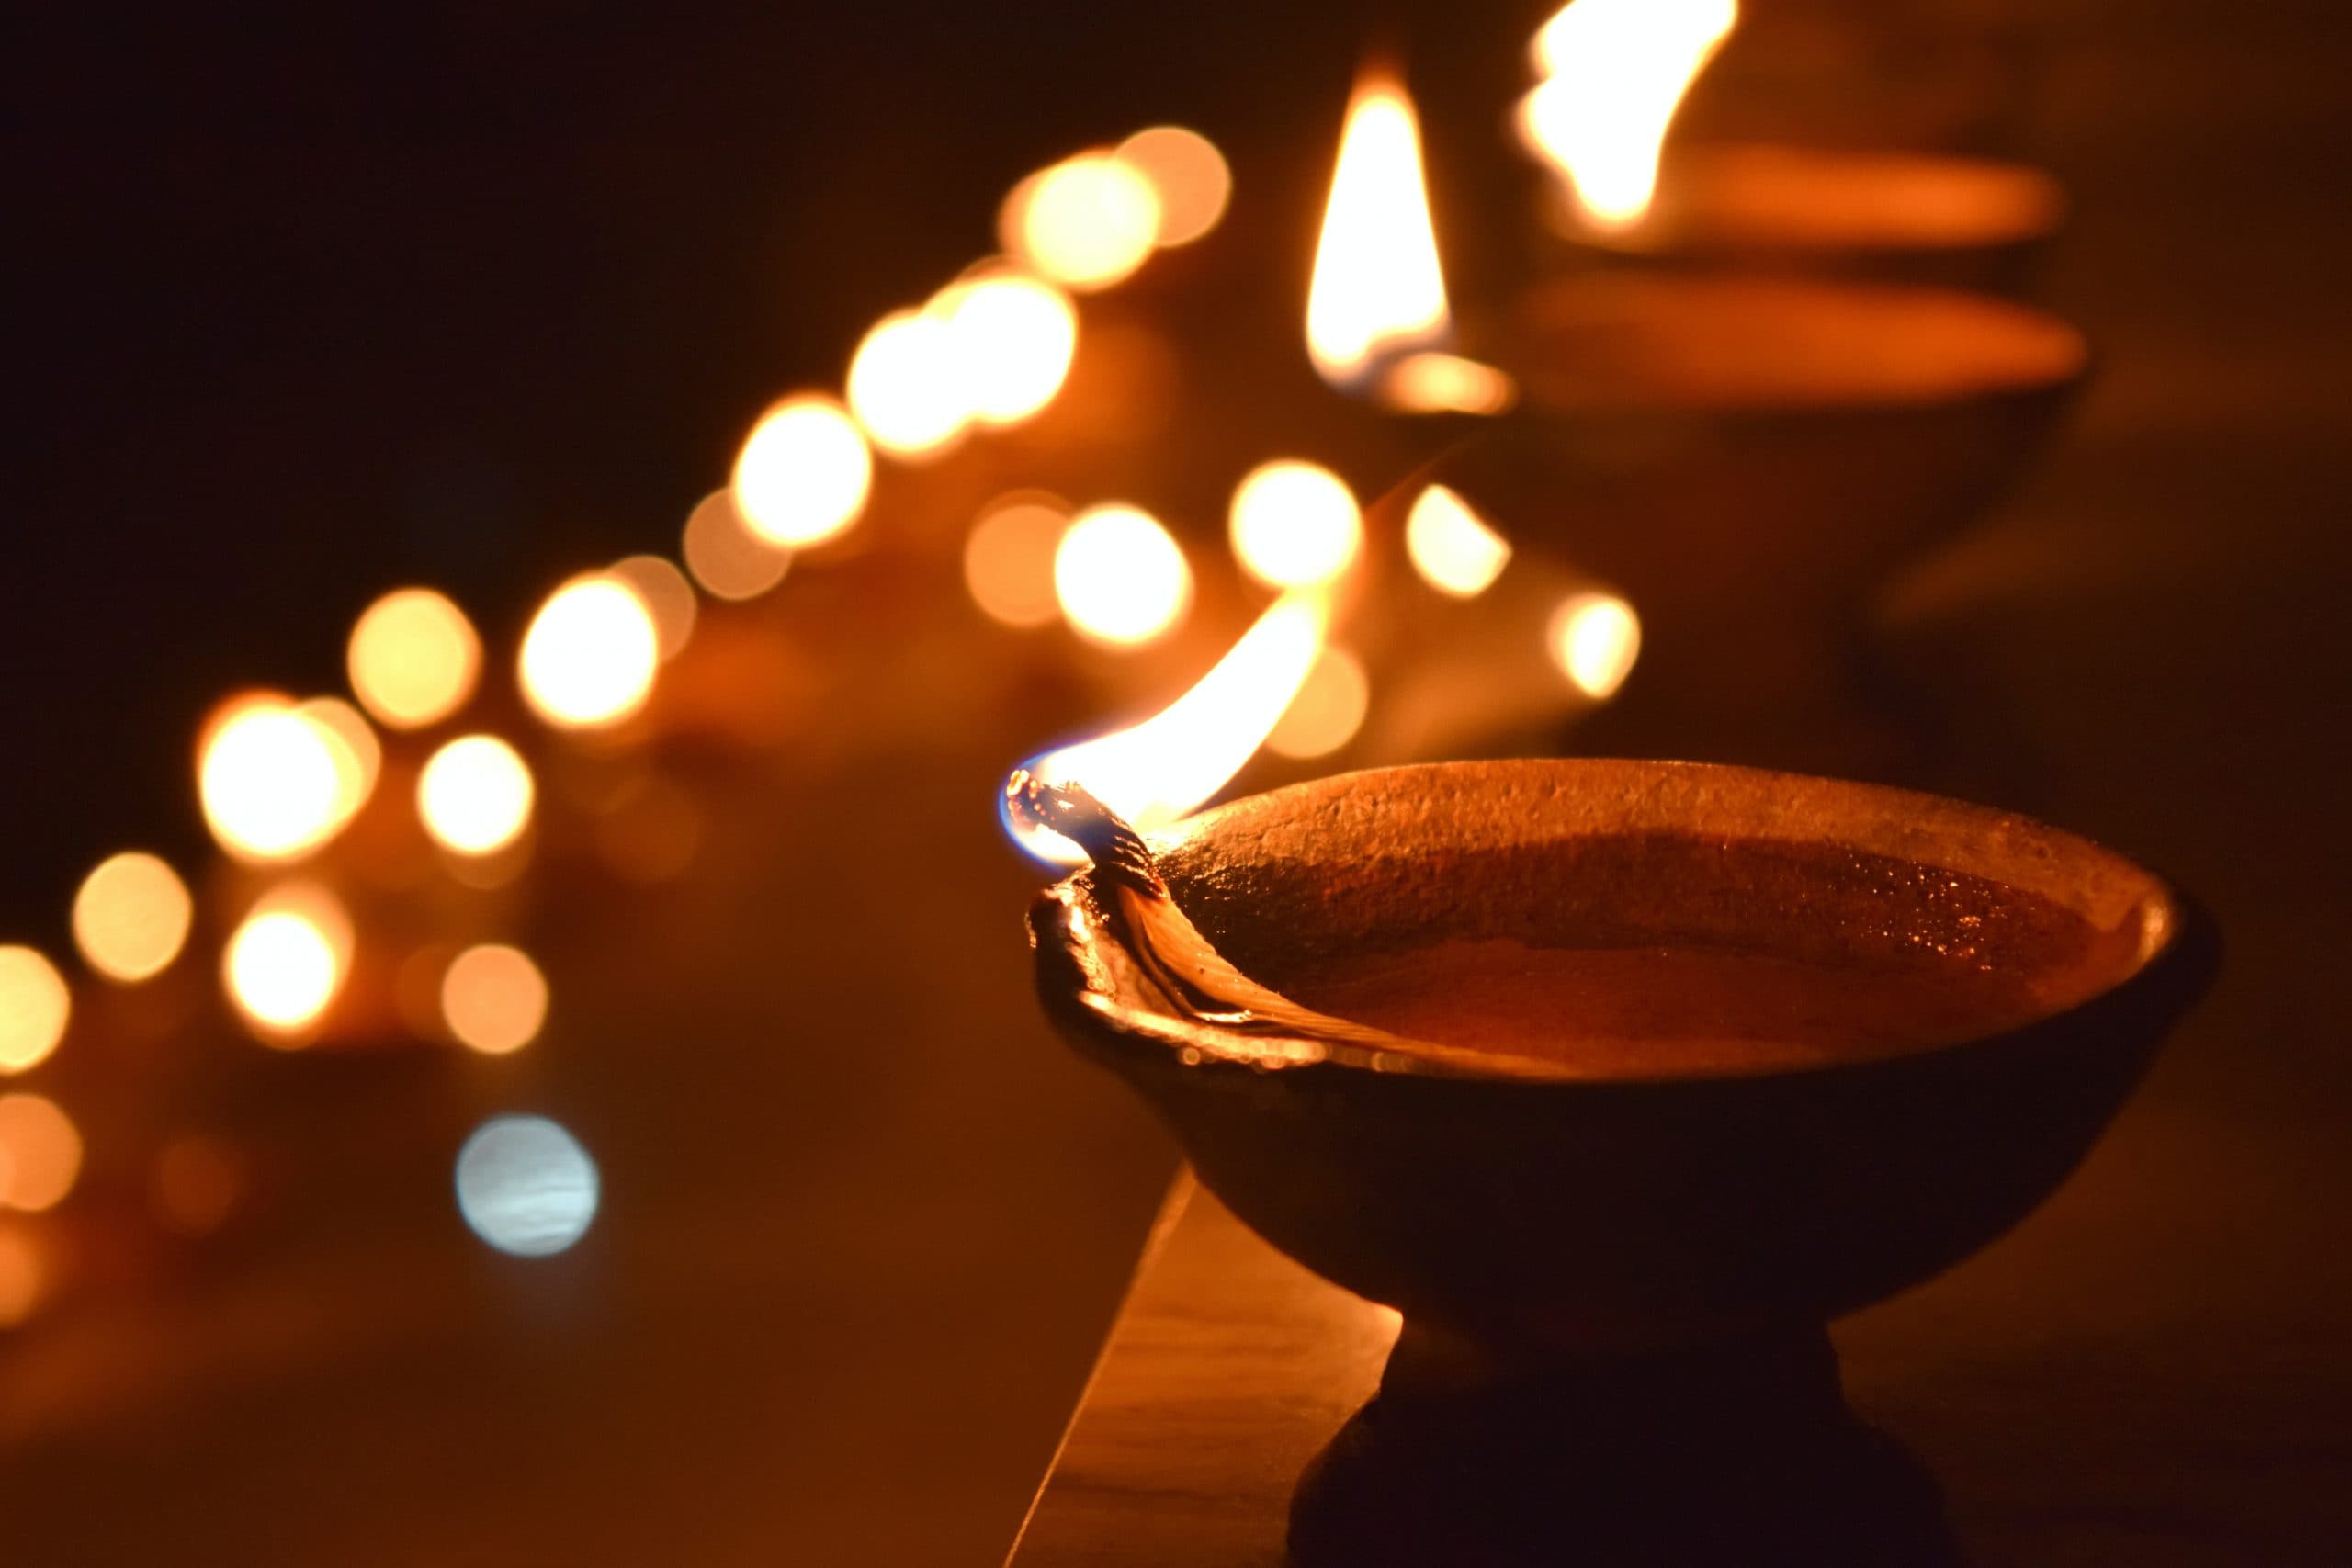 The name Diwali is derived from the Sanskrit term Deepavali. What is its English translation?